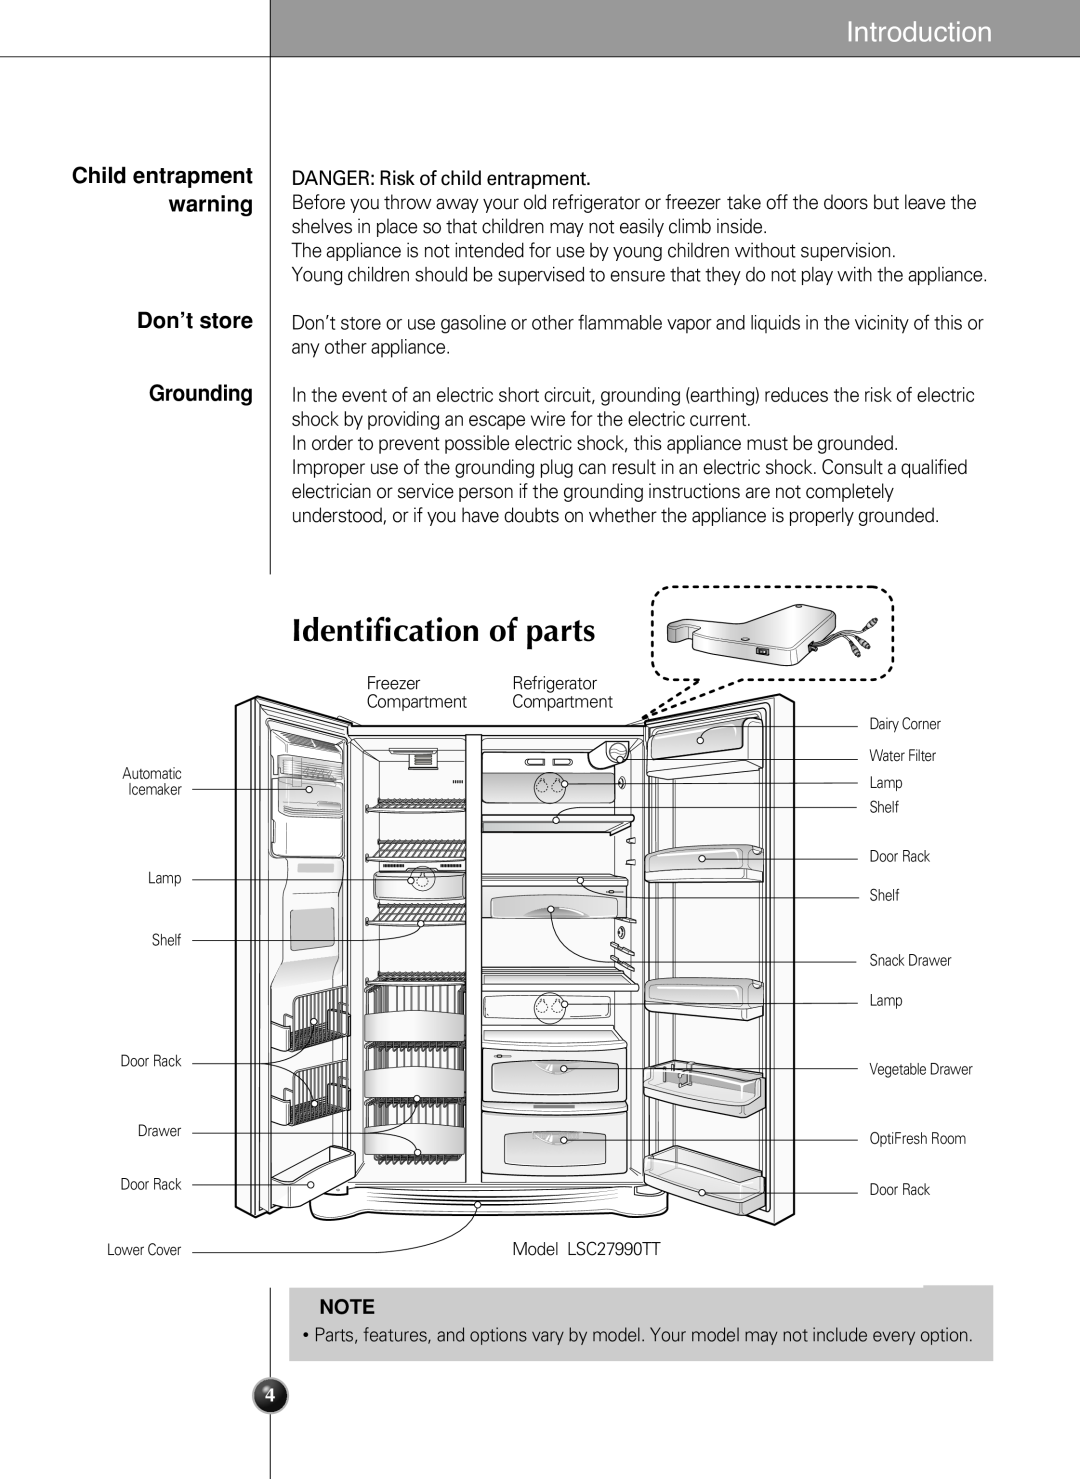 LG Electronics LSC27990TT manual Identification of parts, Don’t store Grounding, Introduction 